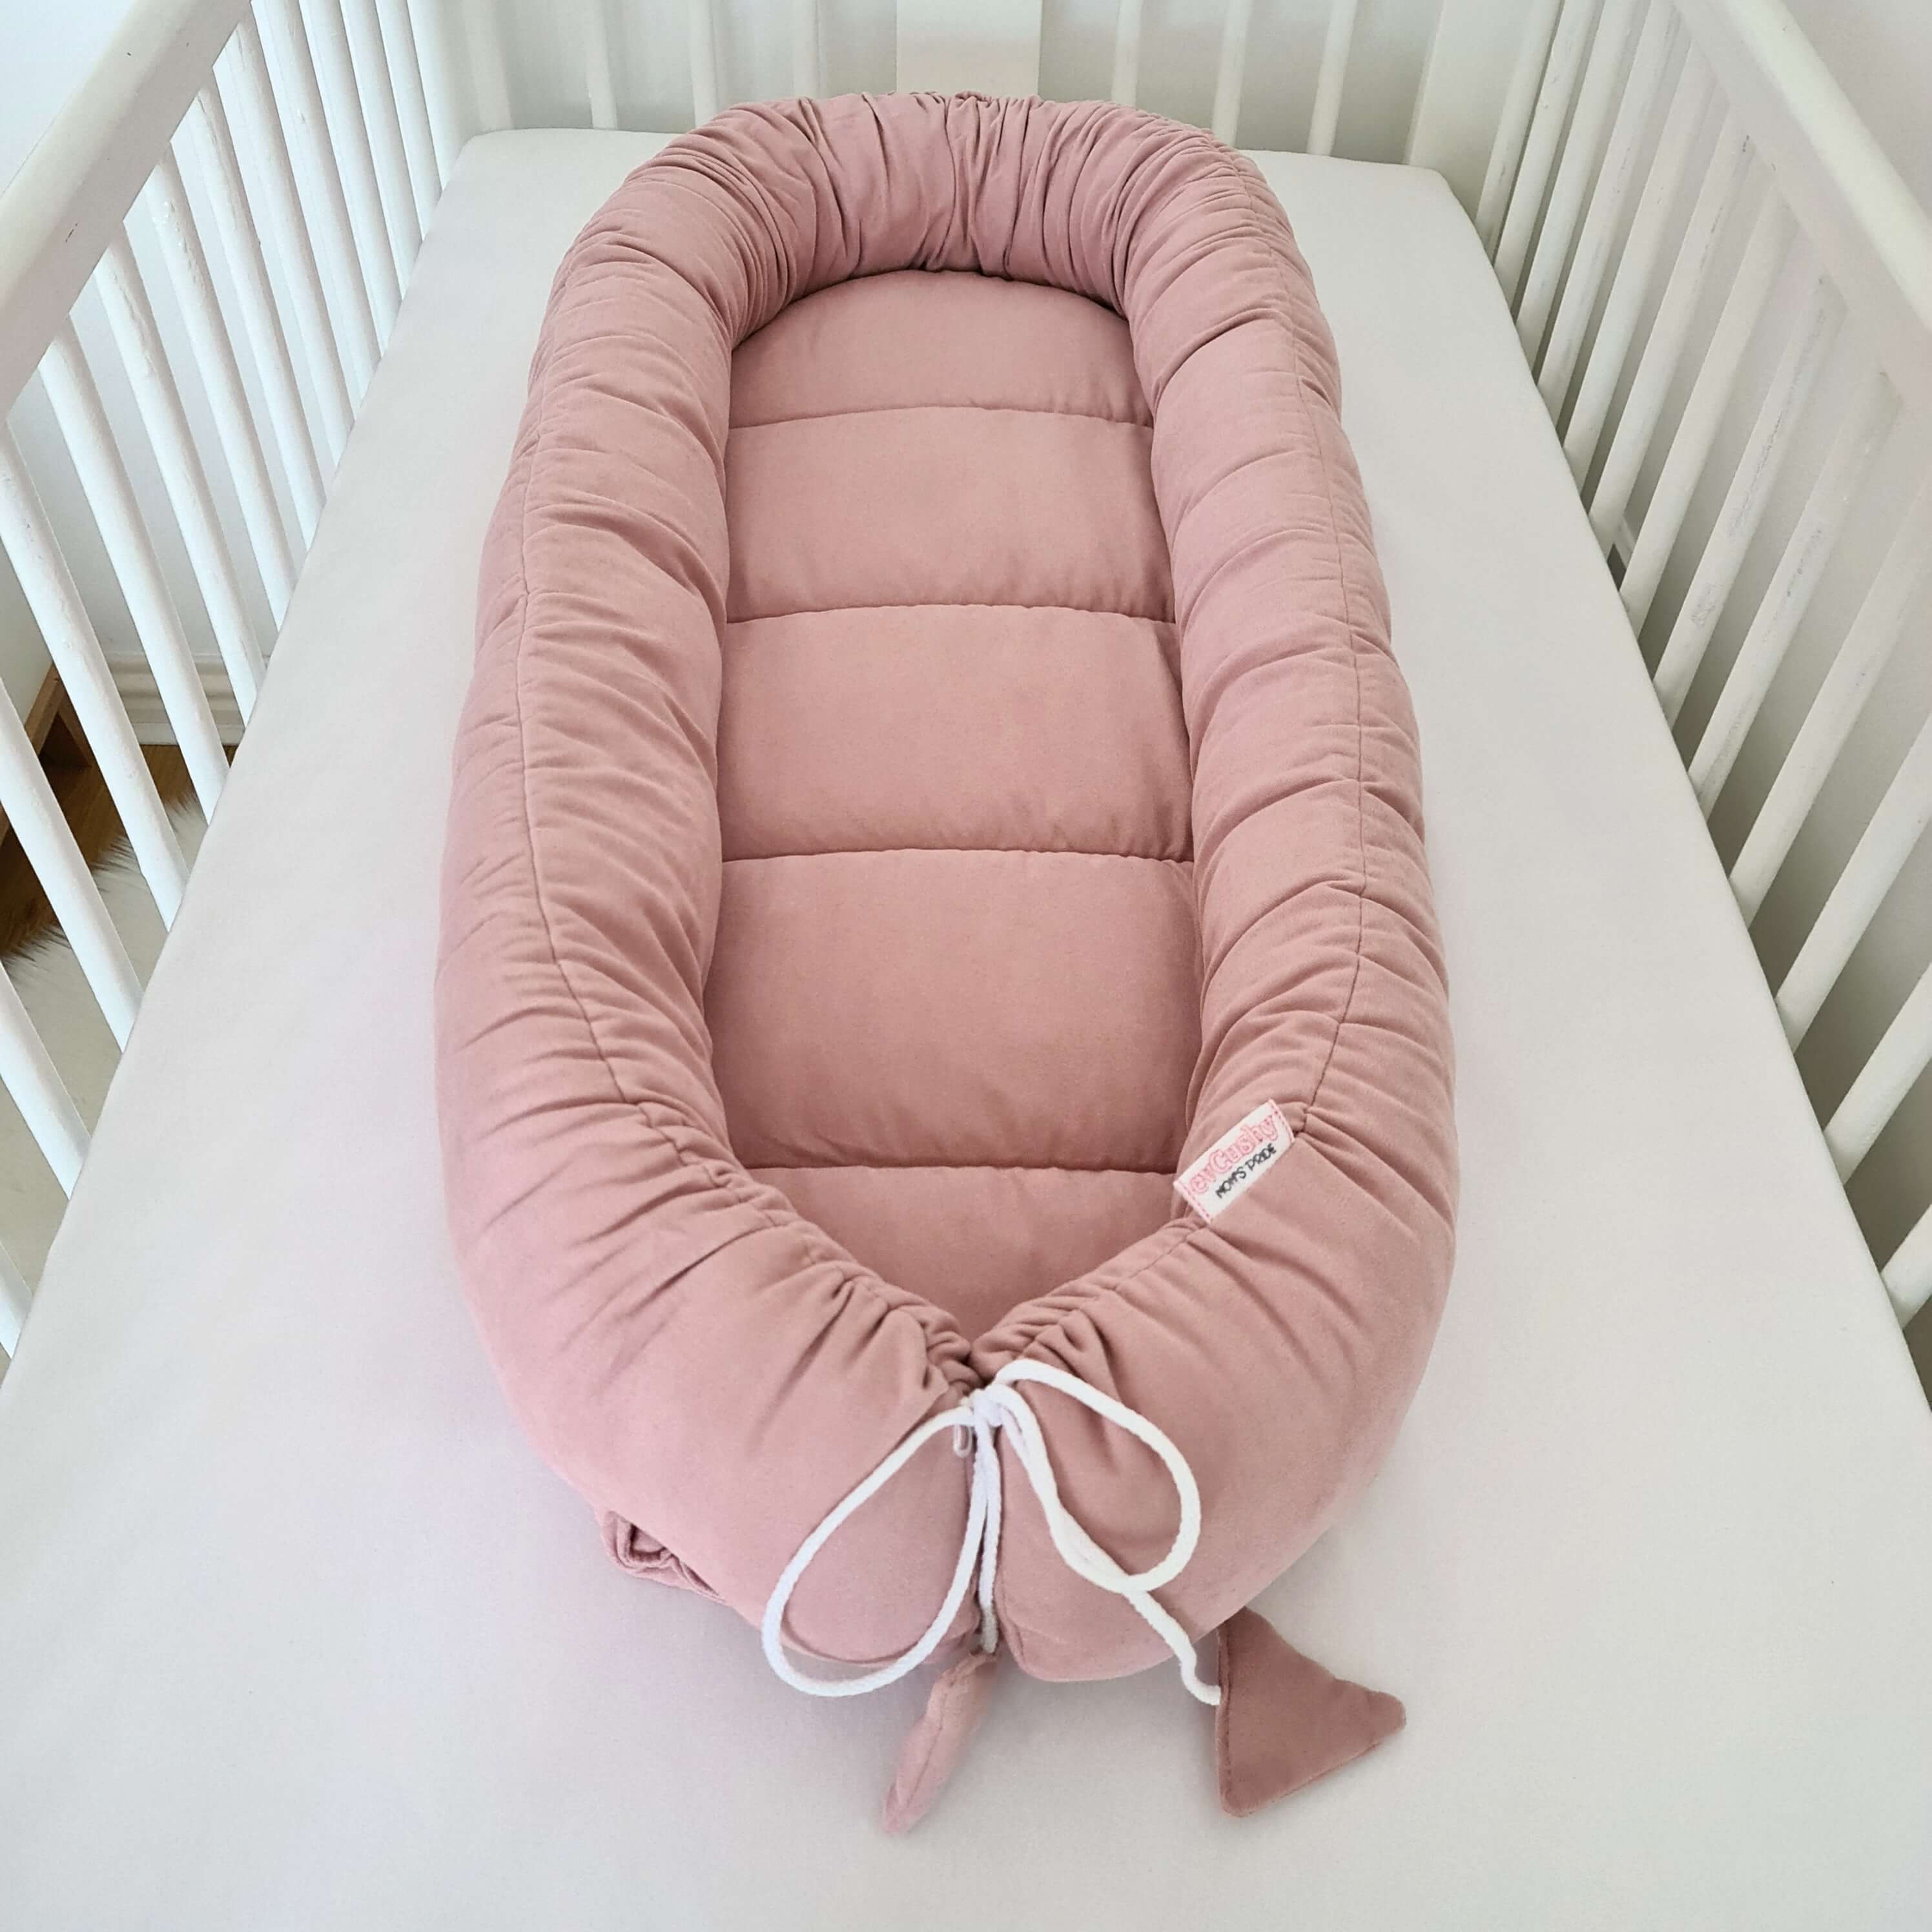 Baby Pod Nest Lounger Size-XL Up To 24 Months In Pink – Mint – Beige – Pink Pre Order Delivery Time 4 Weeks – evCushy